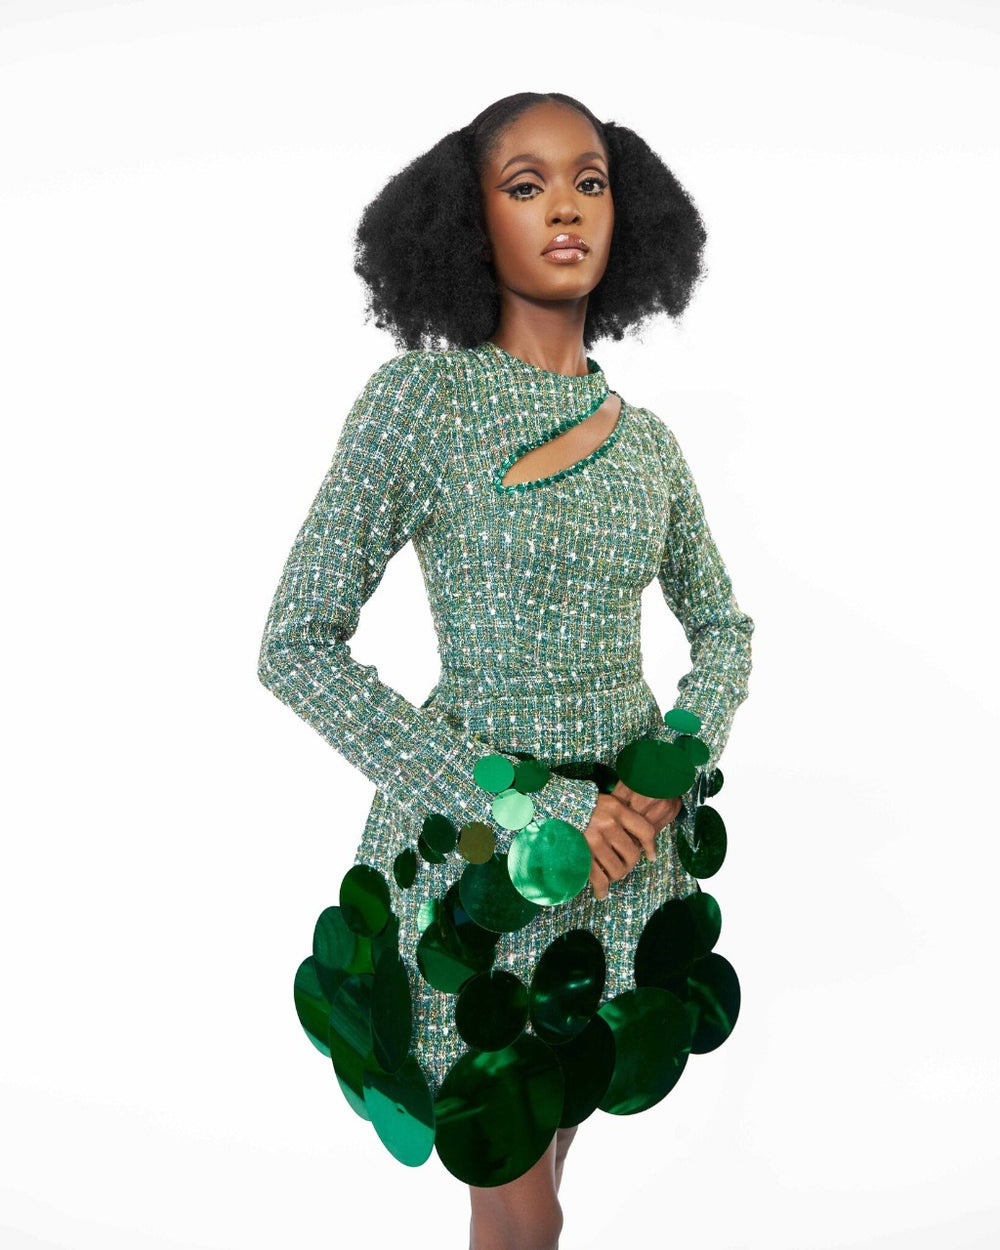 A model wearing a Green top with cut-out neckline detail and sequins embellishment at the neckline and sleeve hem and a Green high waist mini skirt with sequins embellishment